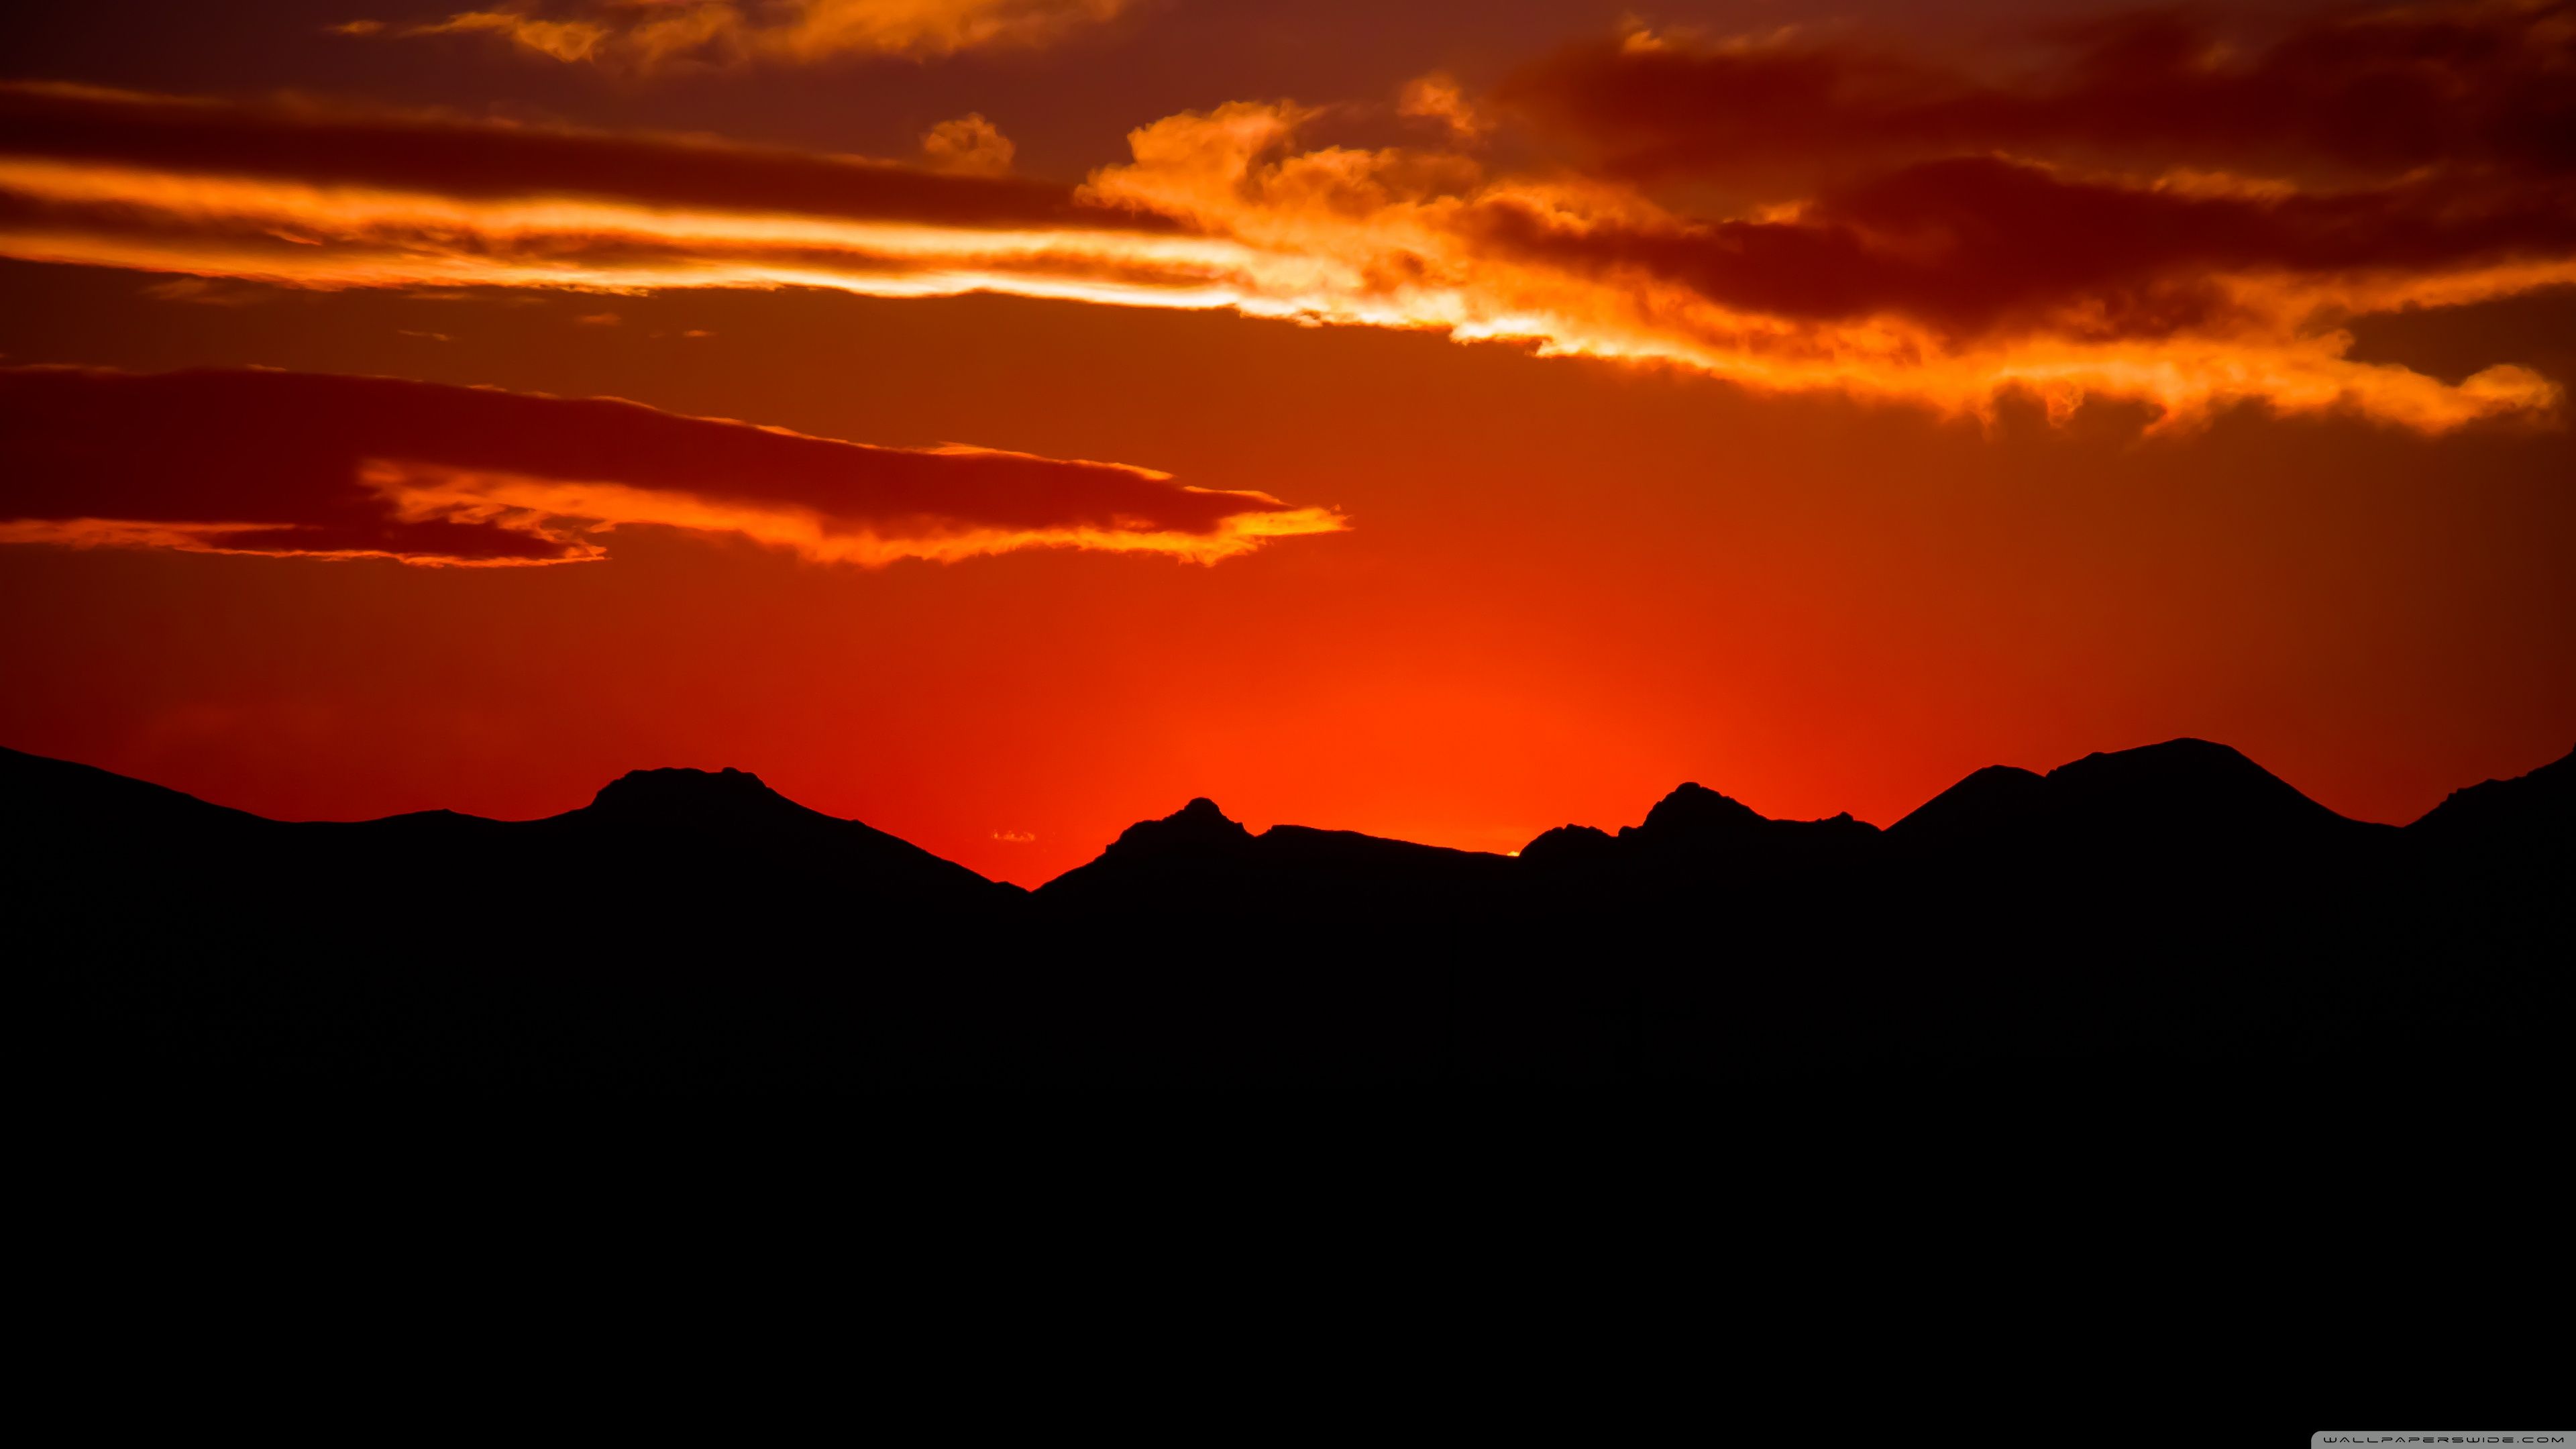 A red sunset over the mountains wallpaper 2560x1600 - Dark orange